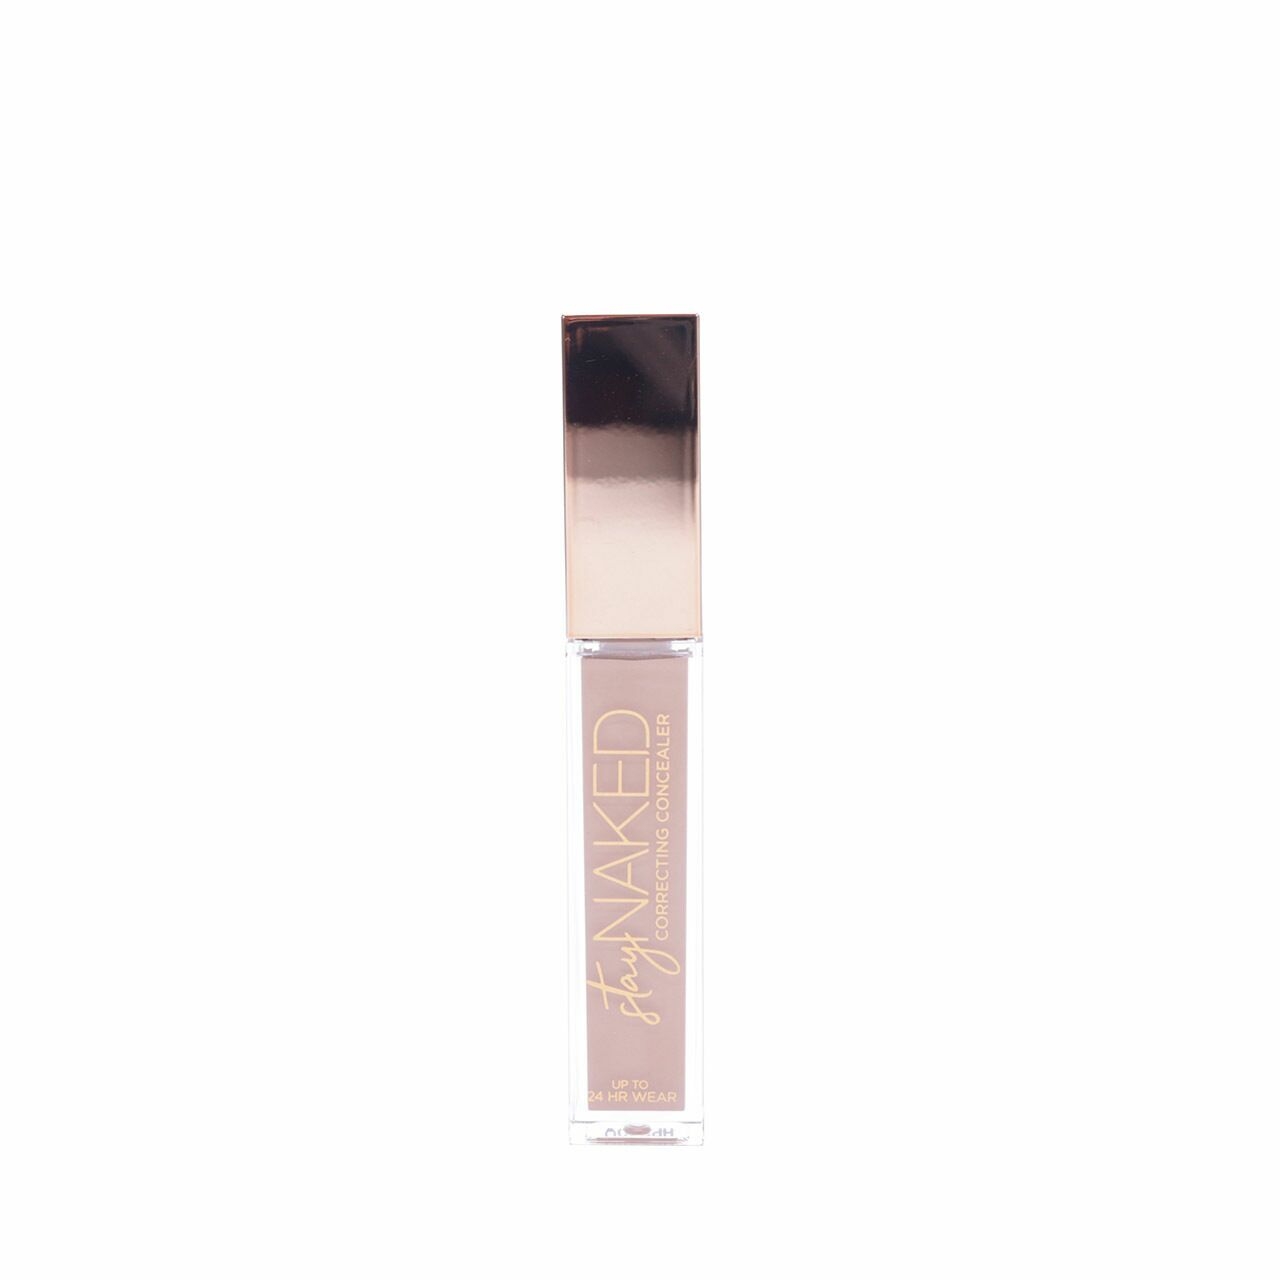 Urban Decay Stay Naked Correcting Concealer 30CP Faces